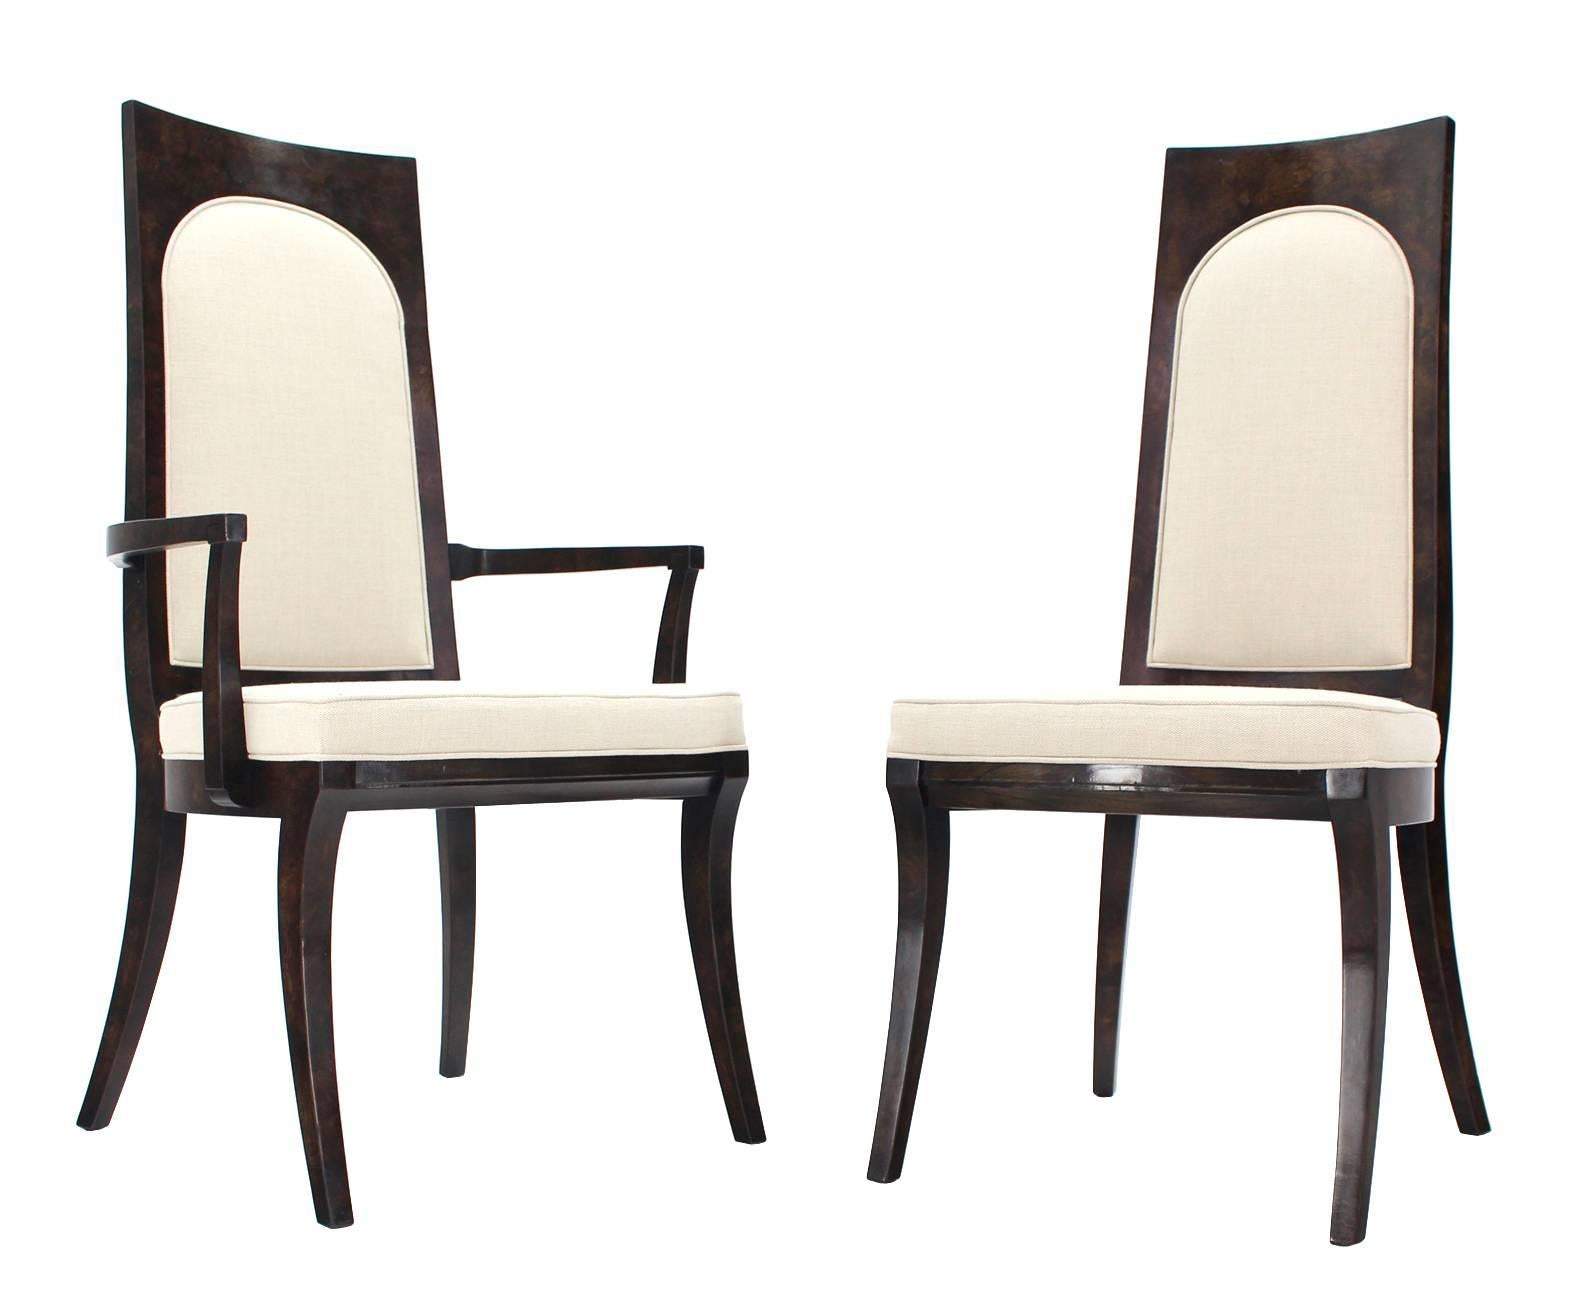 Gorgeous newly upholstered dining chairs by Mastercraft.